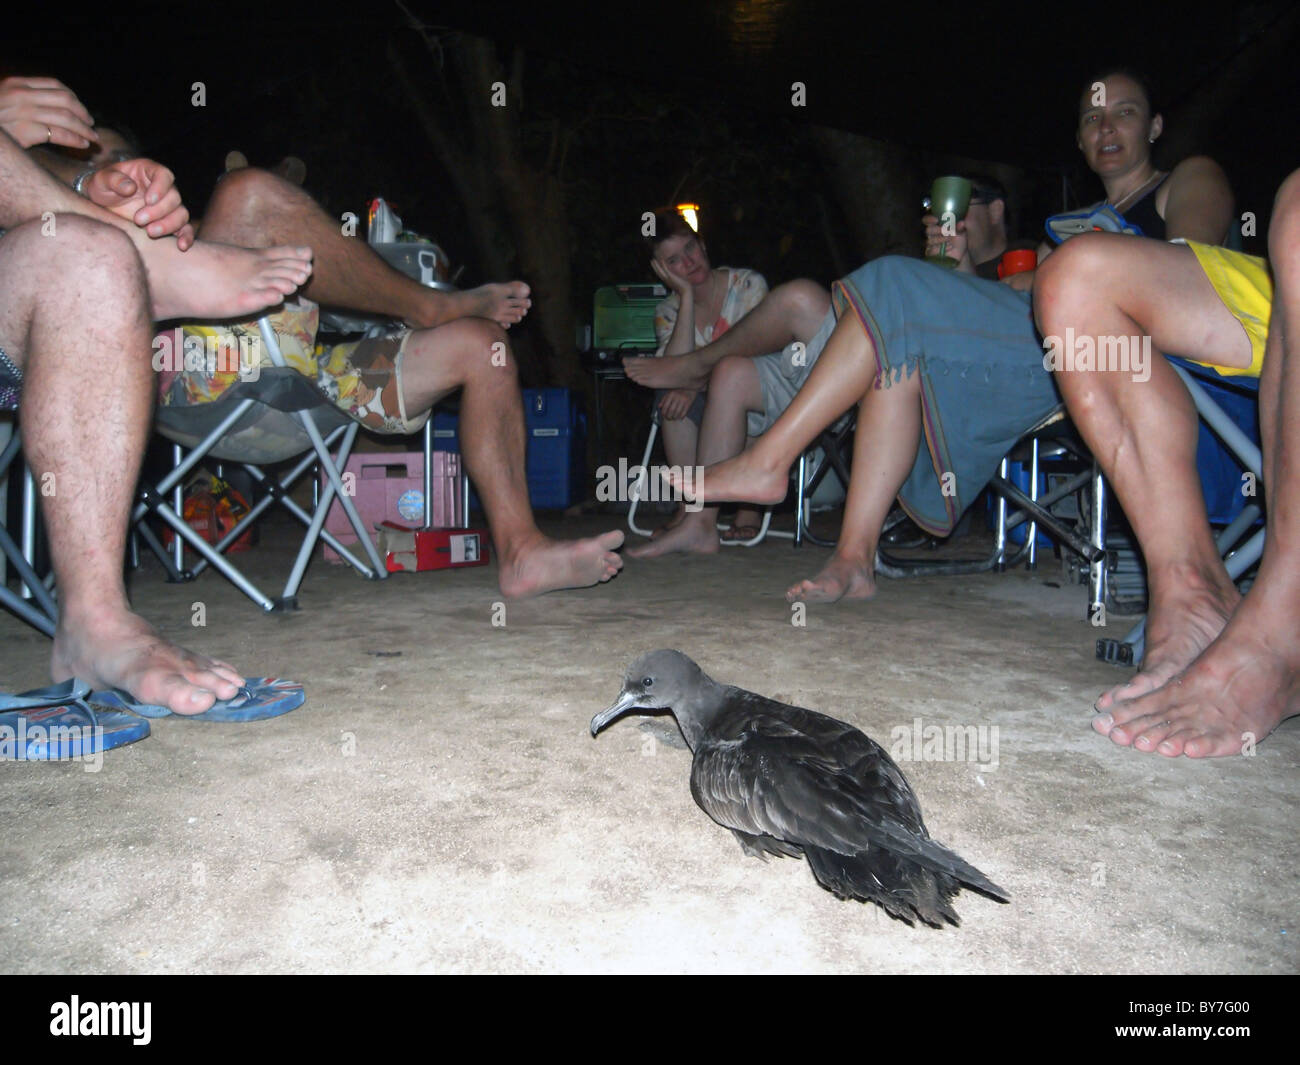 Muttonbird (Puffinus pacificus) crash-landing in the midst of a group of campers in the evening, North West Island, Queensland Stock Photo